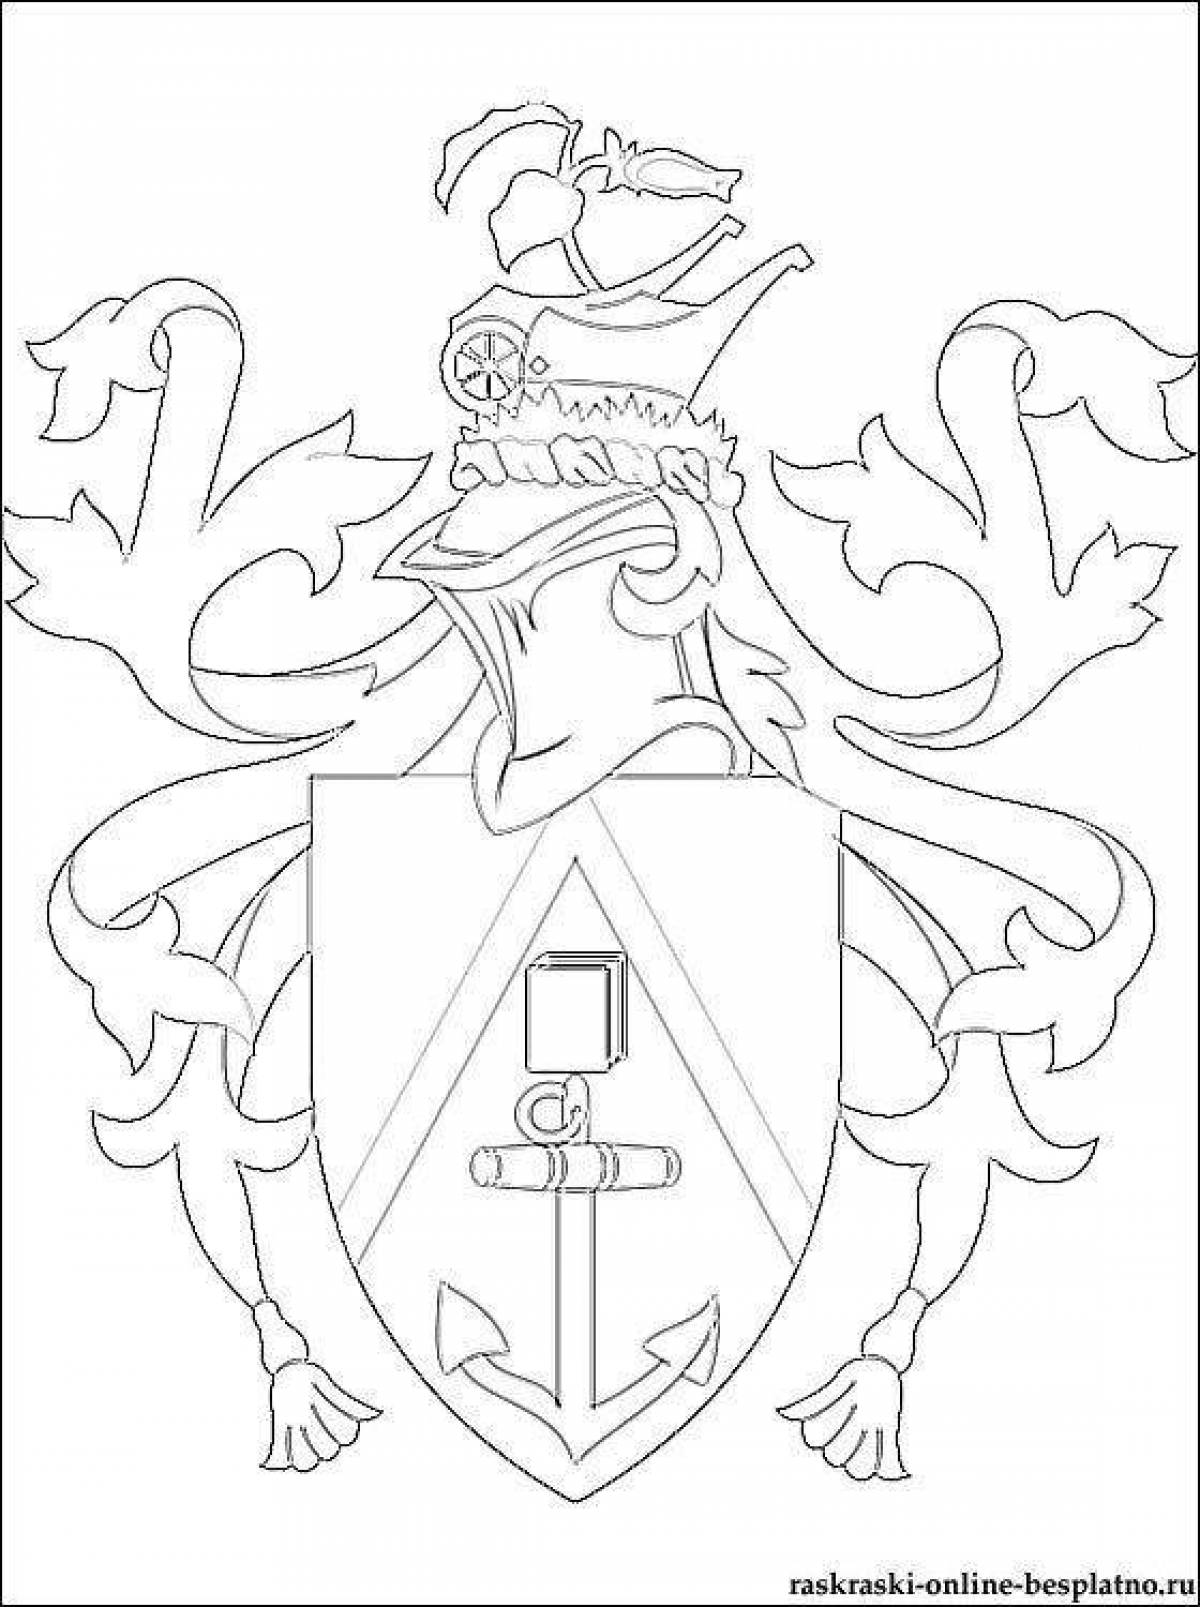 Fantastic family coat of arms coloring book